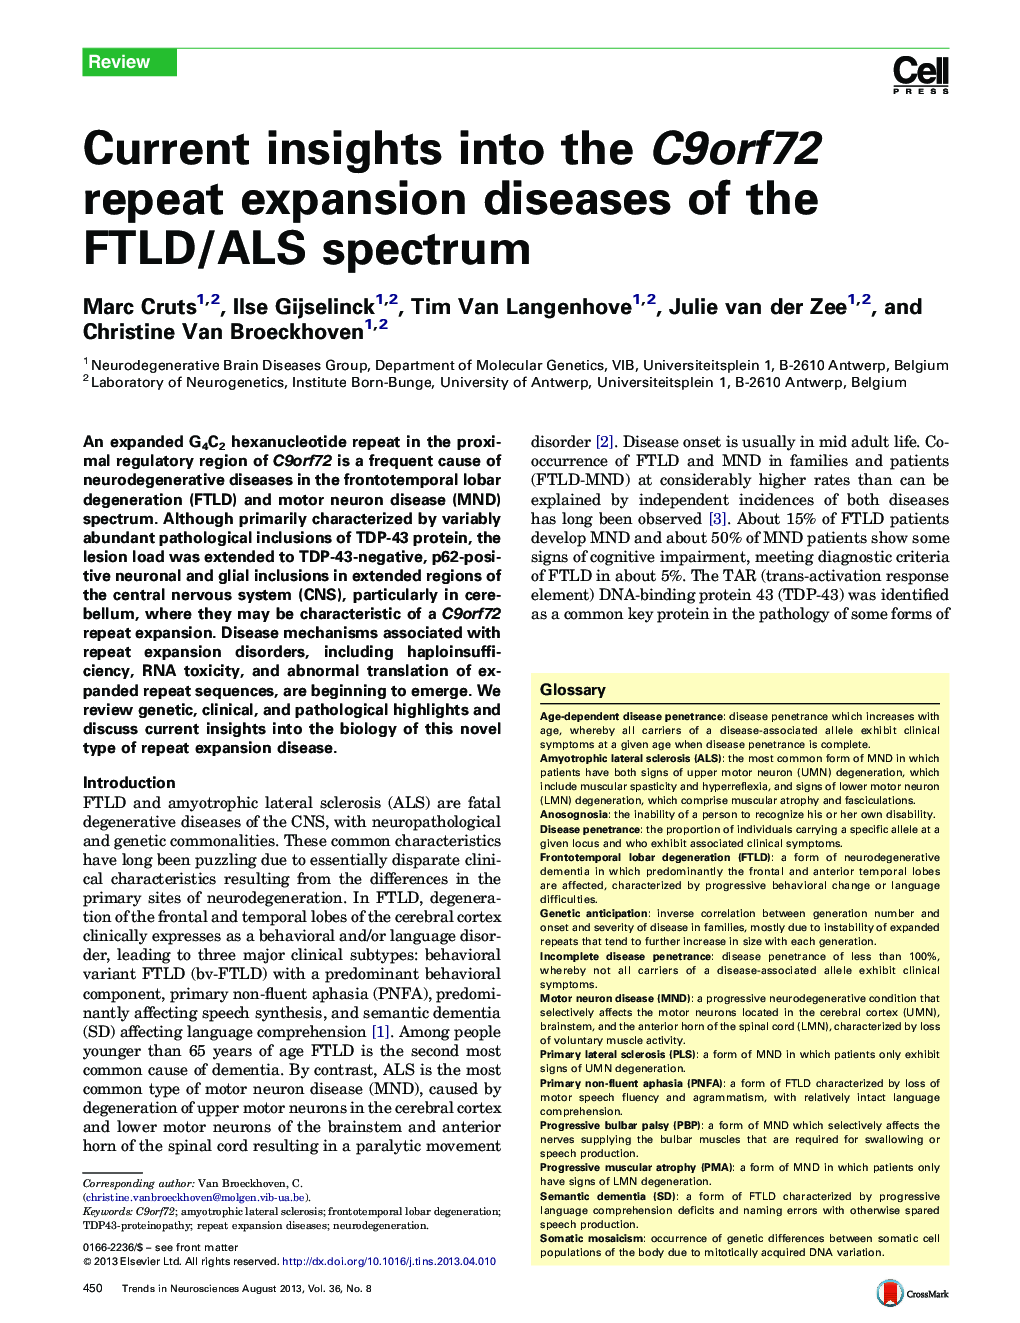 Current insights into the C9orf72 repeat expansion diseases of the FTLD/ALS spectrum